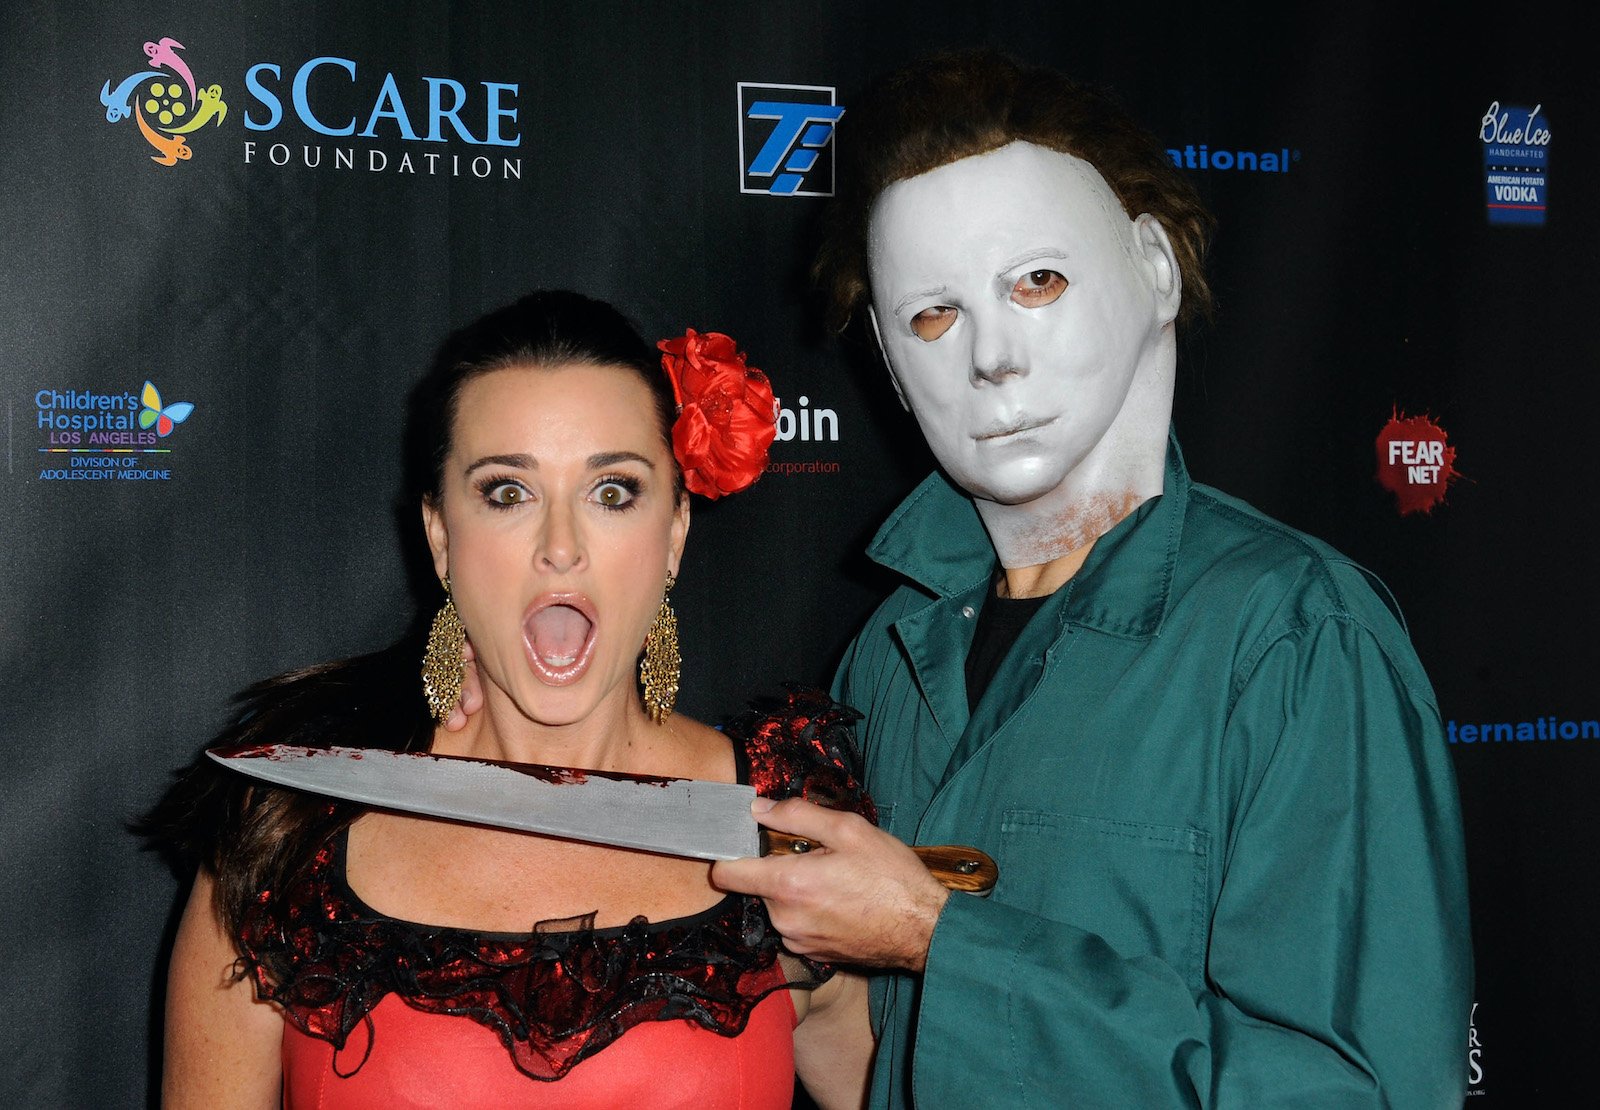 Kyle Richards from RHOBH shares her fears about filming Halloween Kills